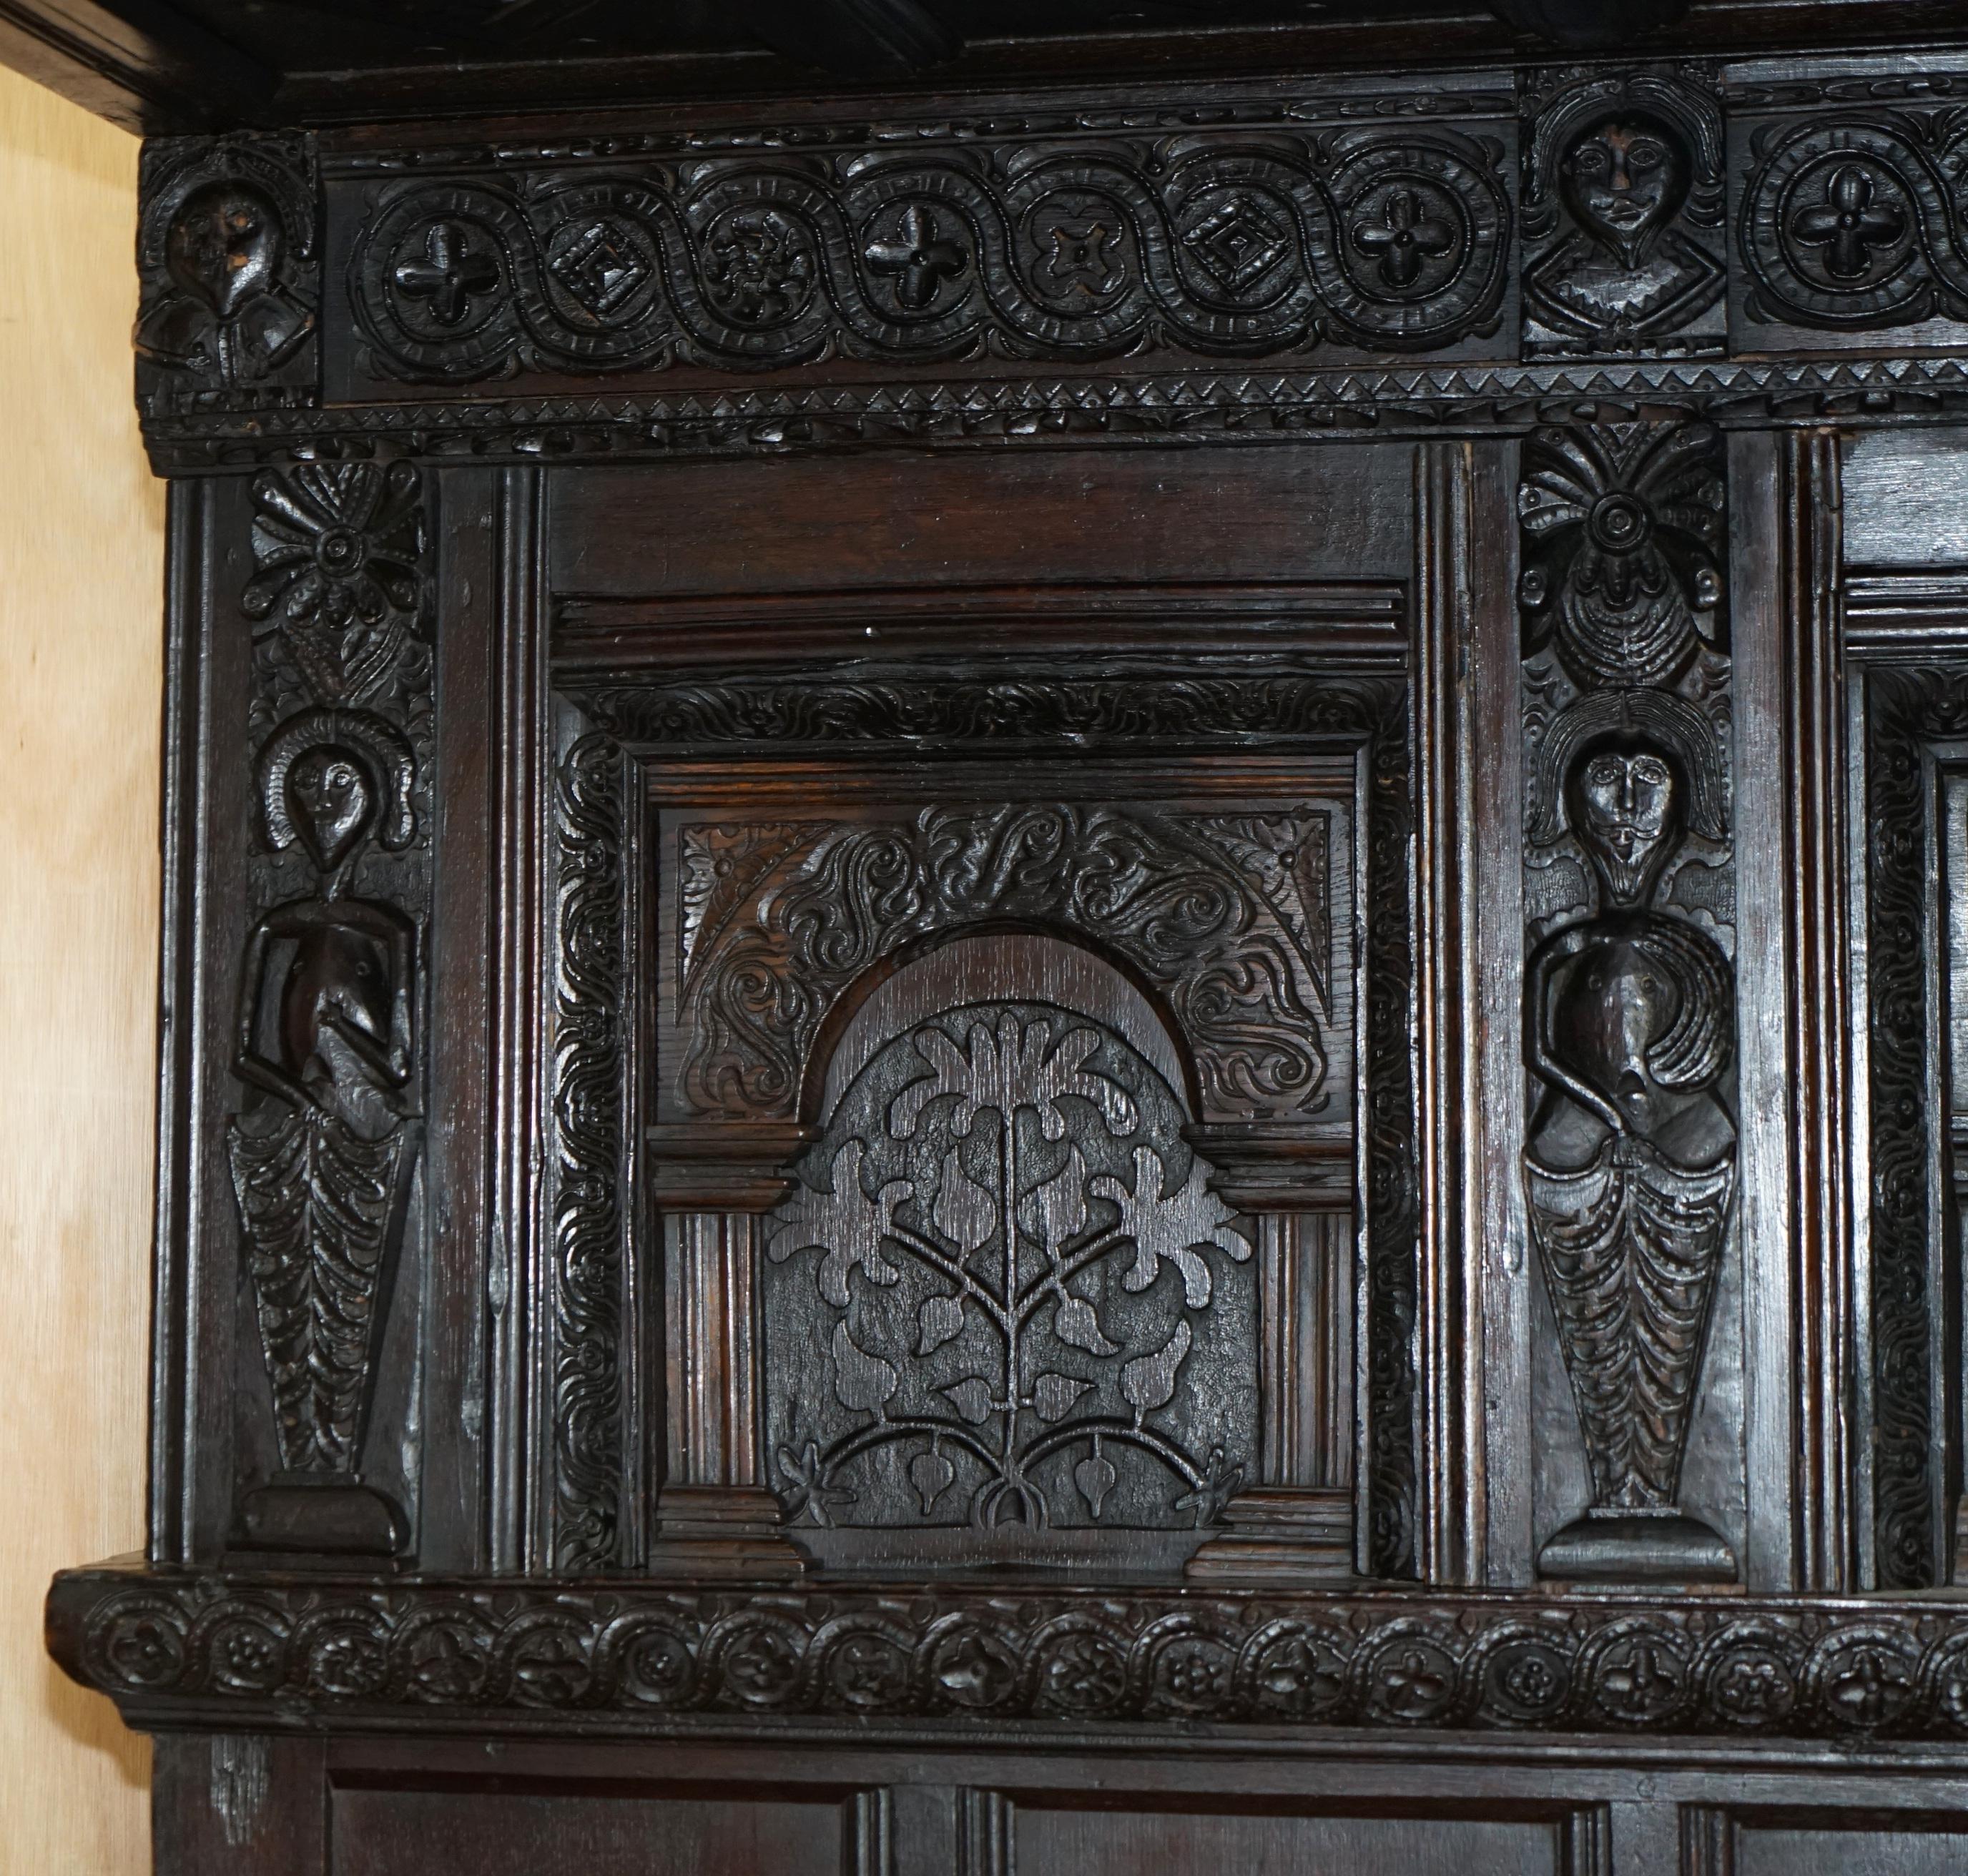 Mid-17th Century 17TH CENTURY JACOBEAN WILLIAM III CIRCA 1650 ENGLiSH OAK TESTER FOUR POSTER BED For Sale